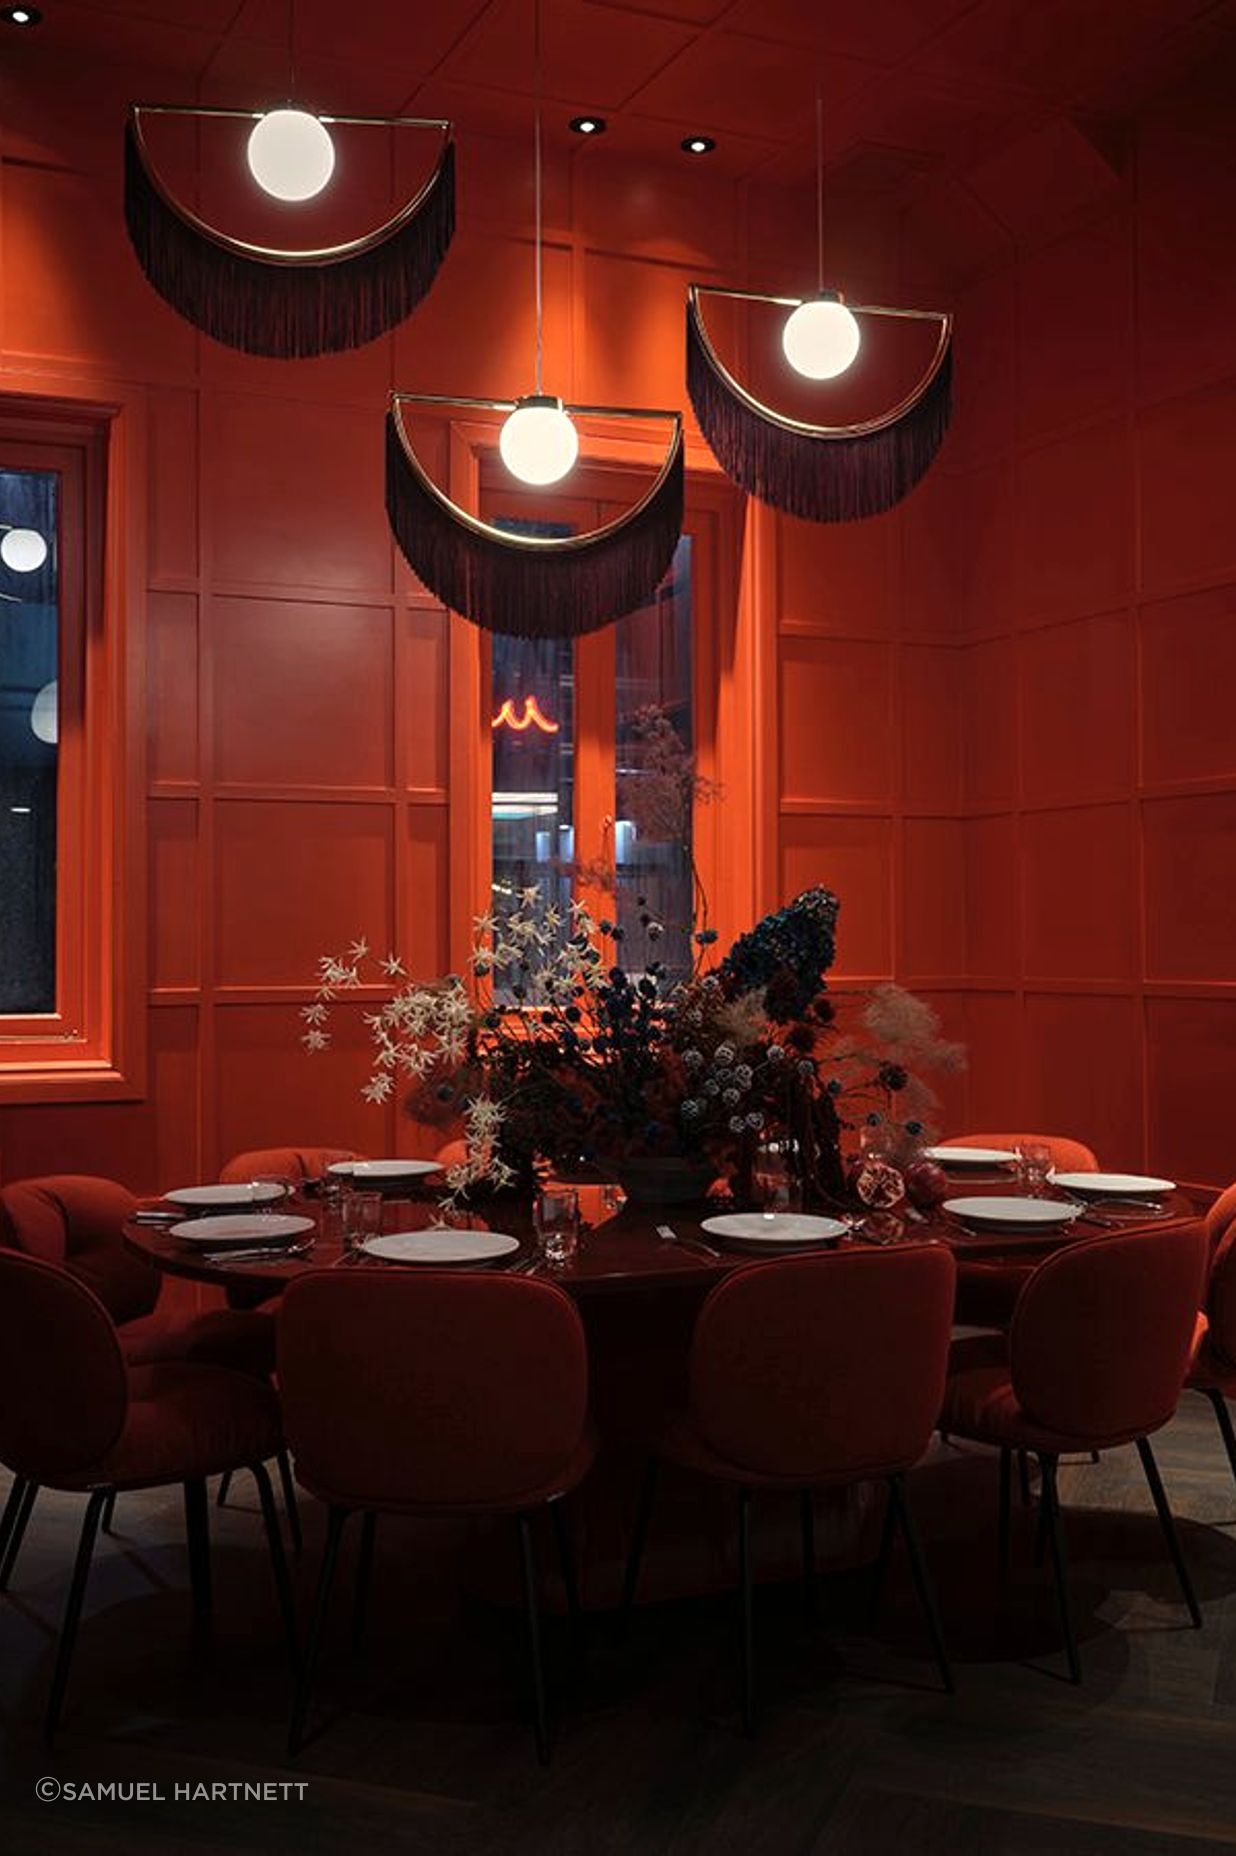 The pendants in the private dining room are by Houtique. “In the nick of time, they arrived pretty much the day before the opening,” says Toni.